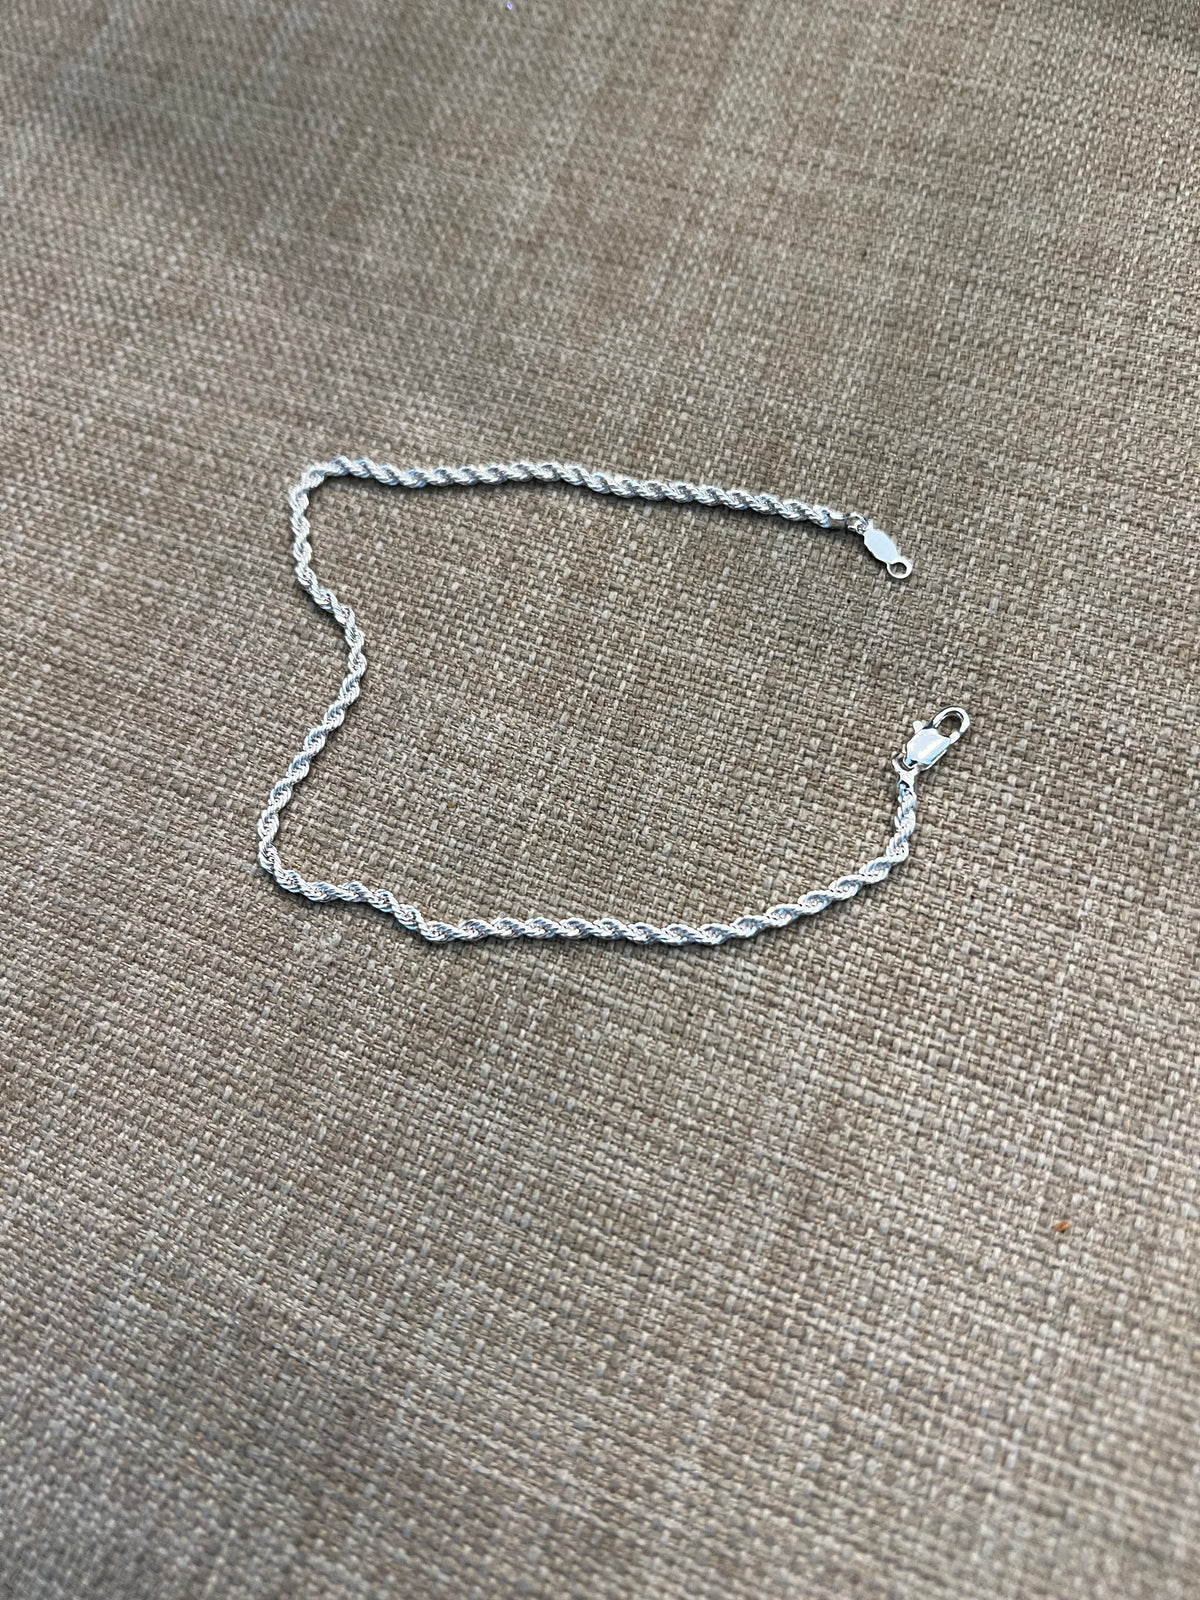 Silver Rope Anklet